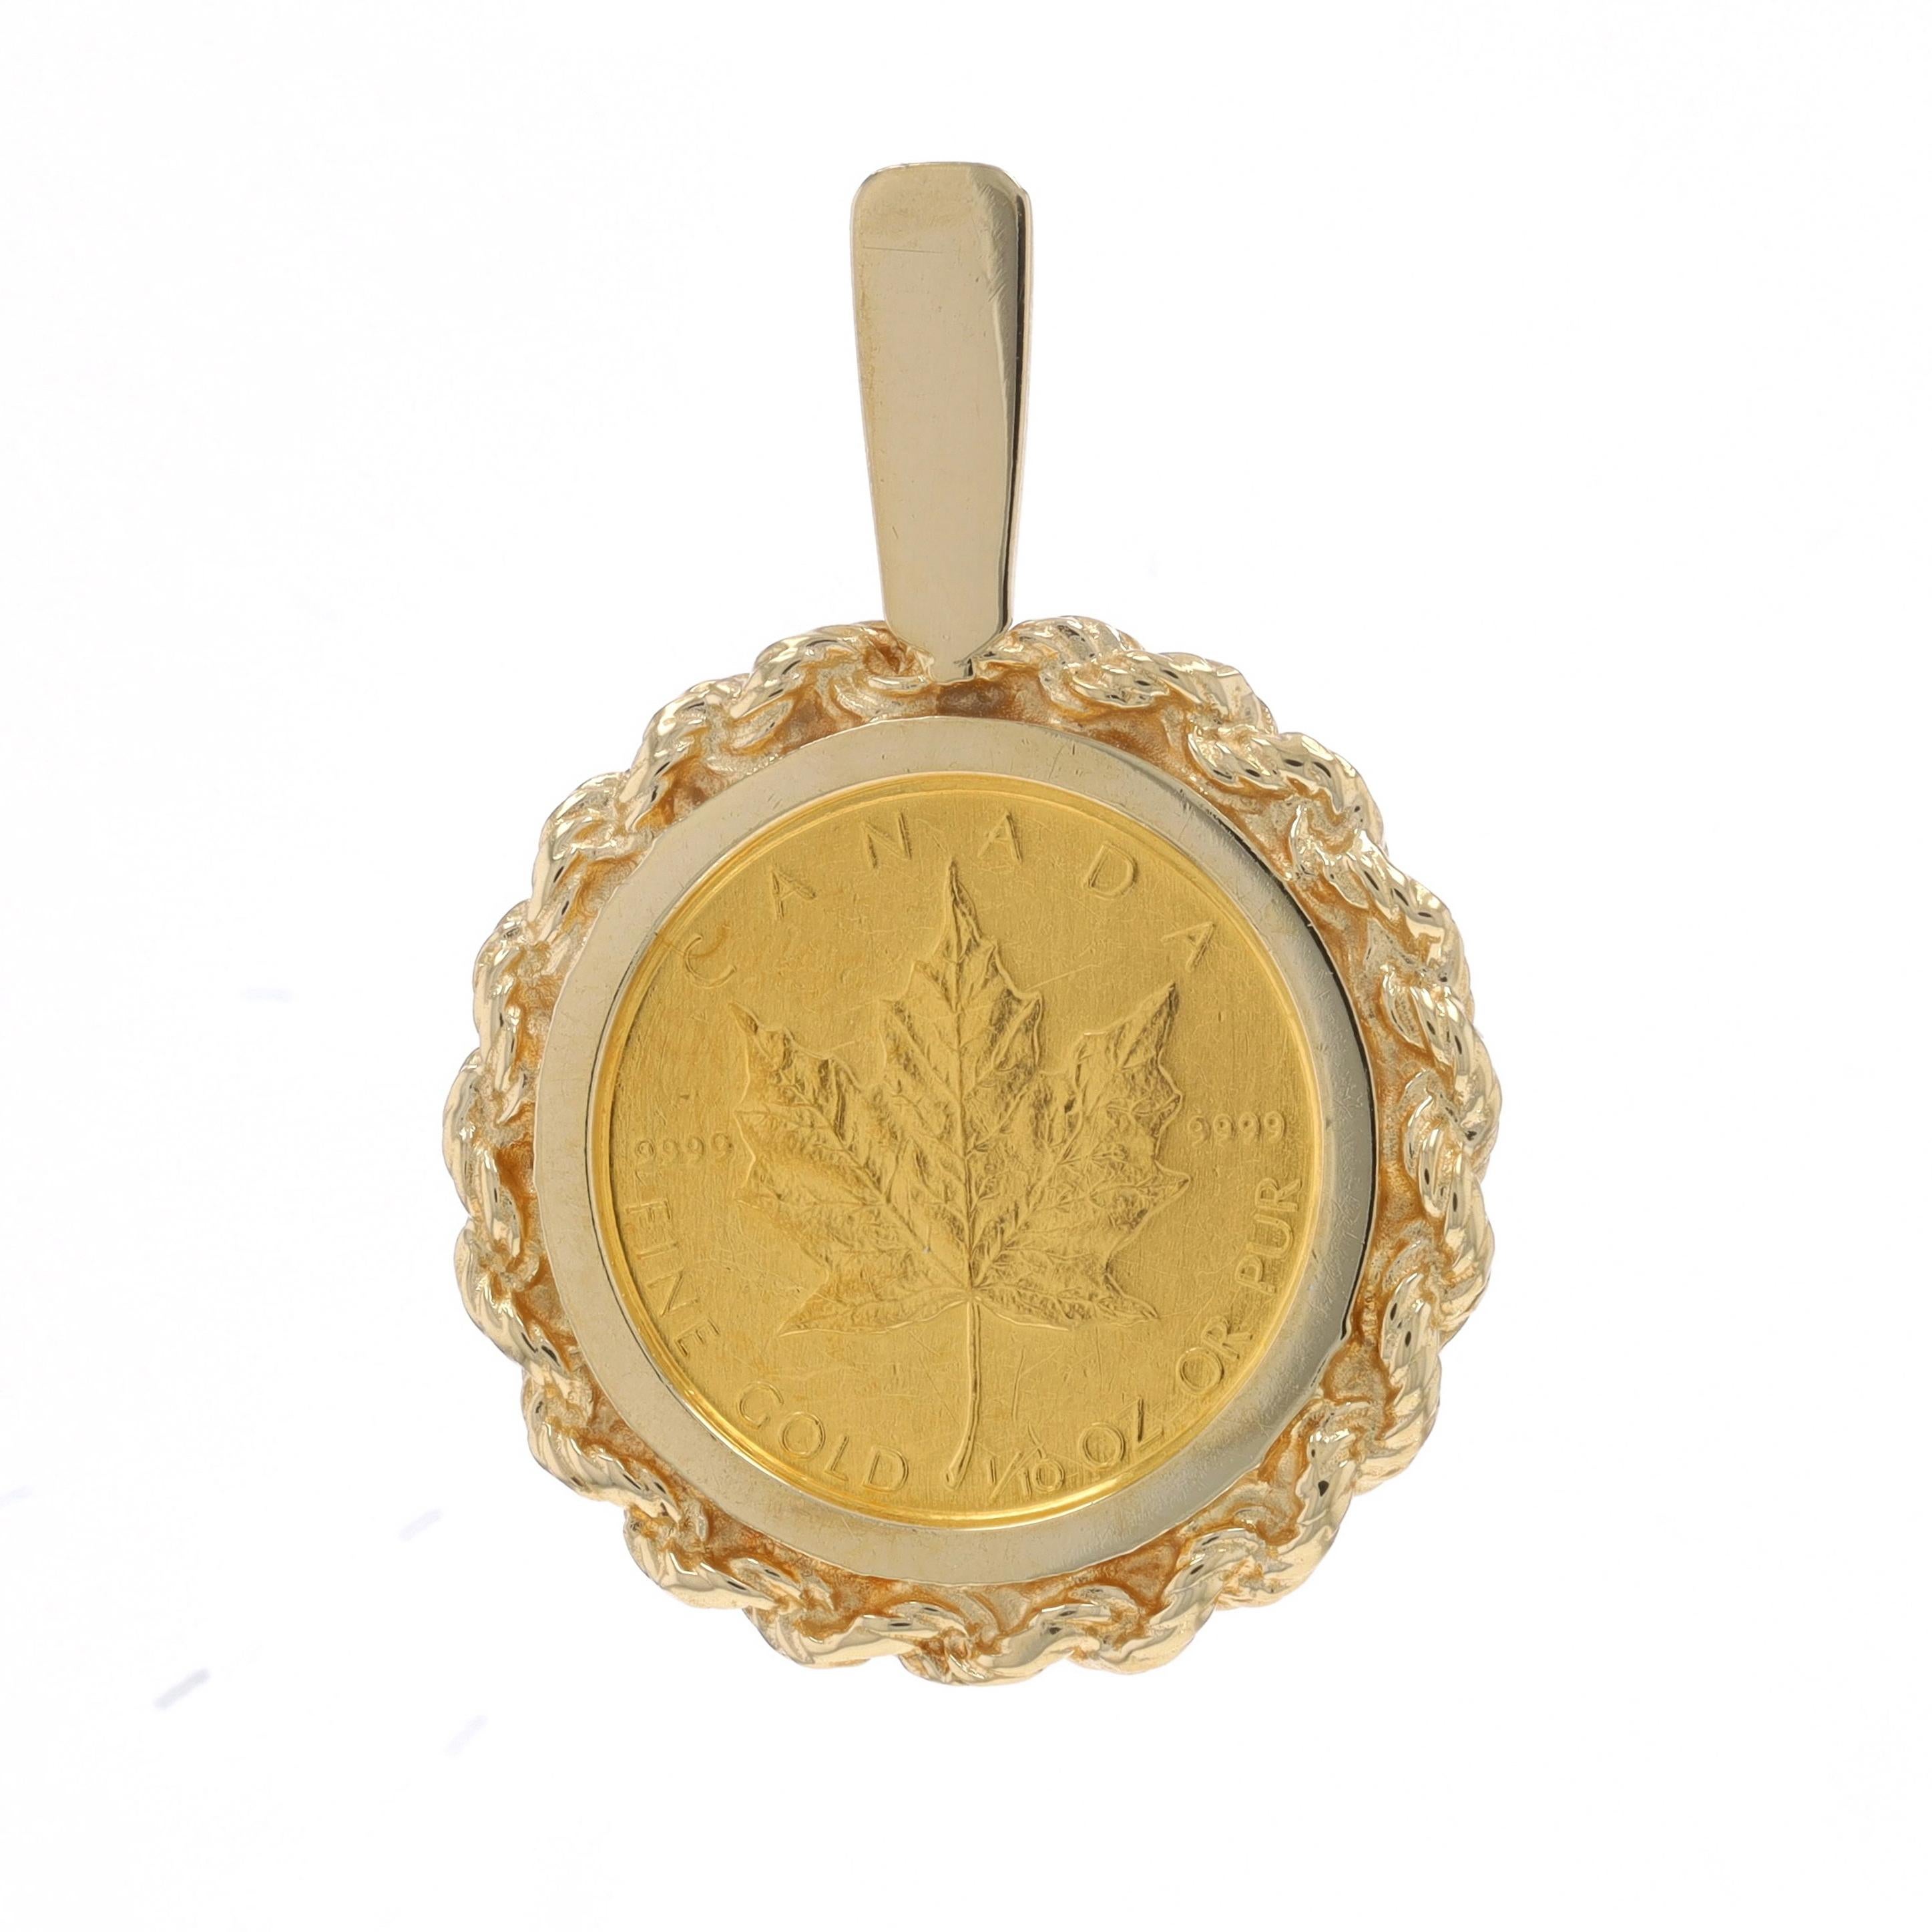 Metal Content: 14k Yellow Gold (pendant) & 1/10oz 999 Fine Gold (coin)

Theme: Currency
Features: Rope Border

Measurements
Tall (from stationary bail): 1 1/4